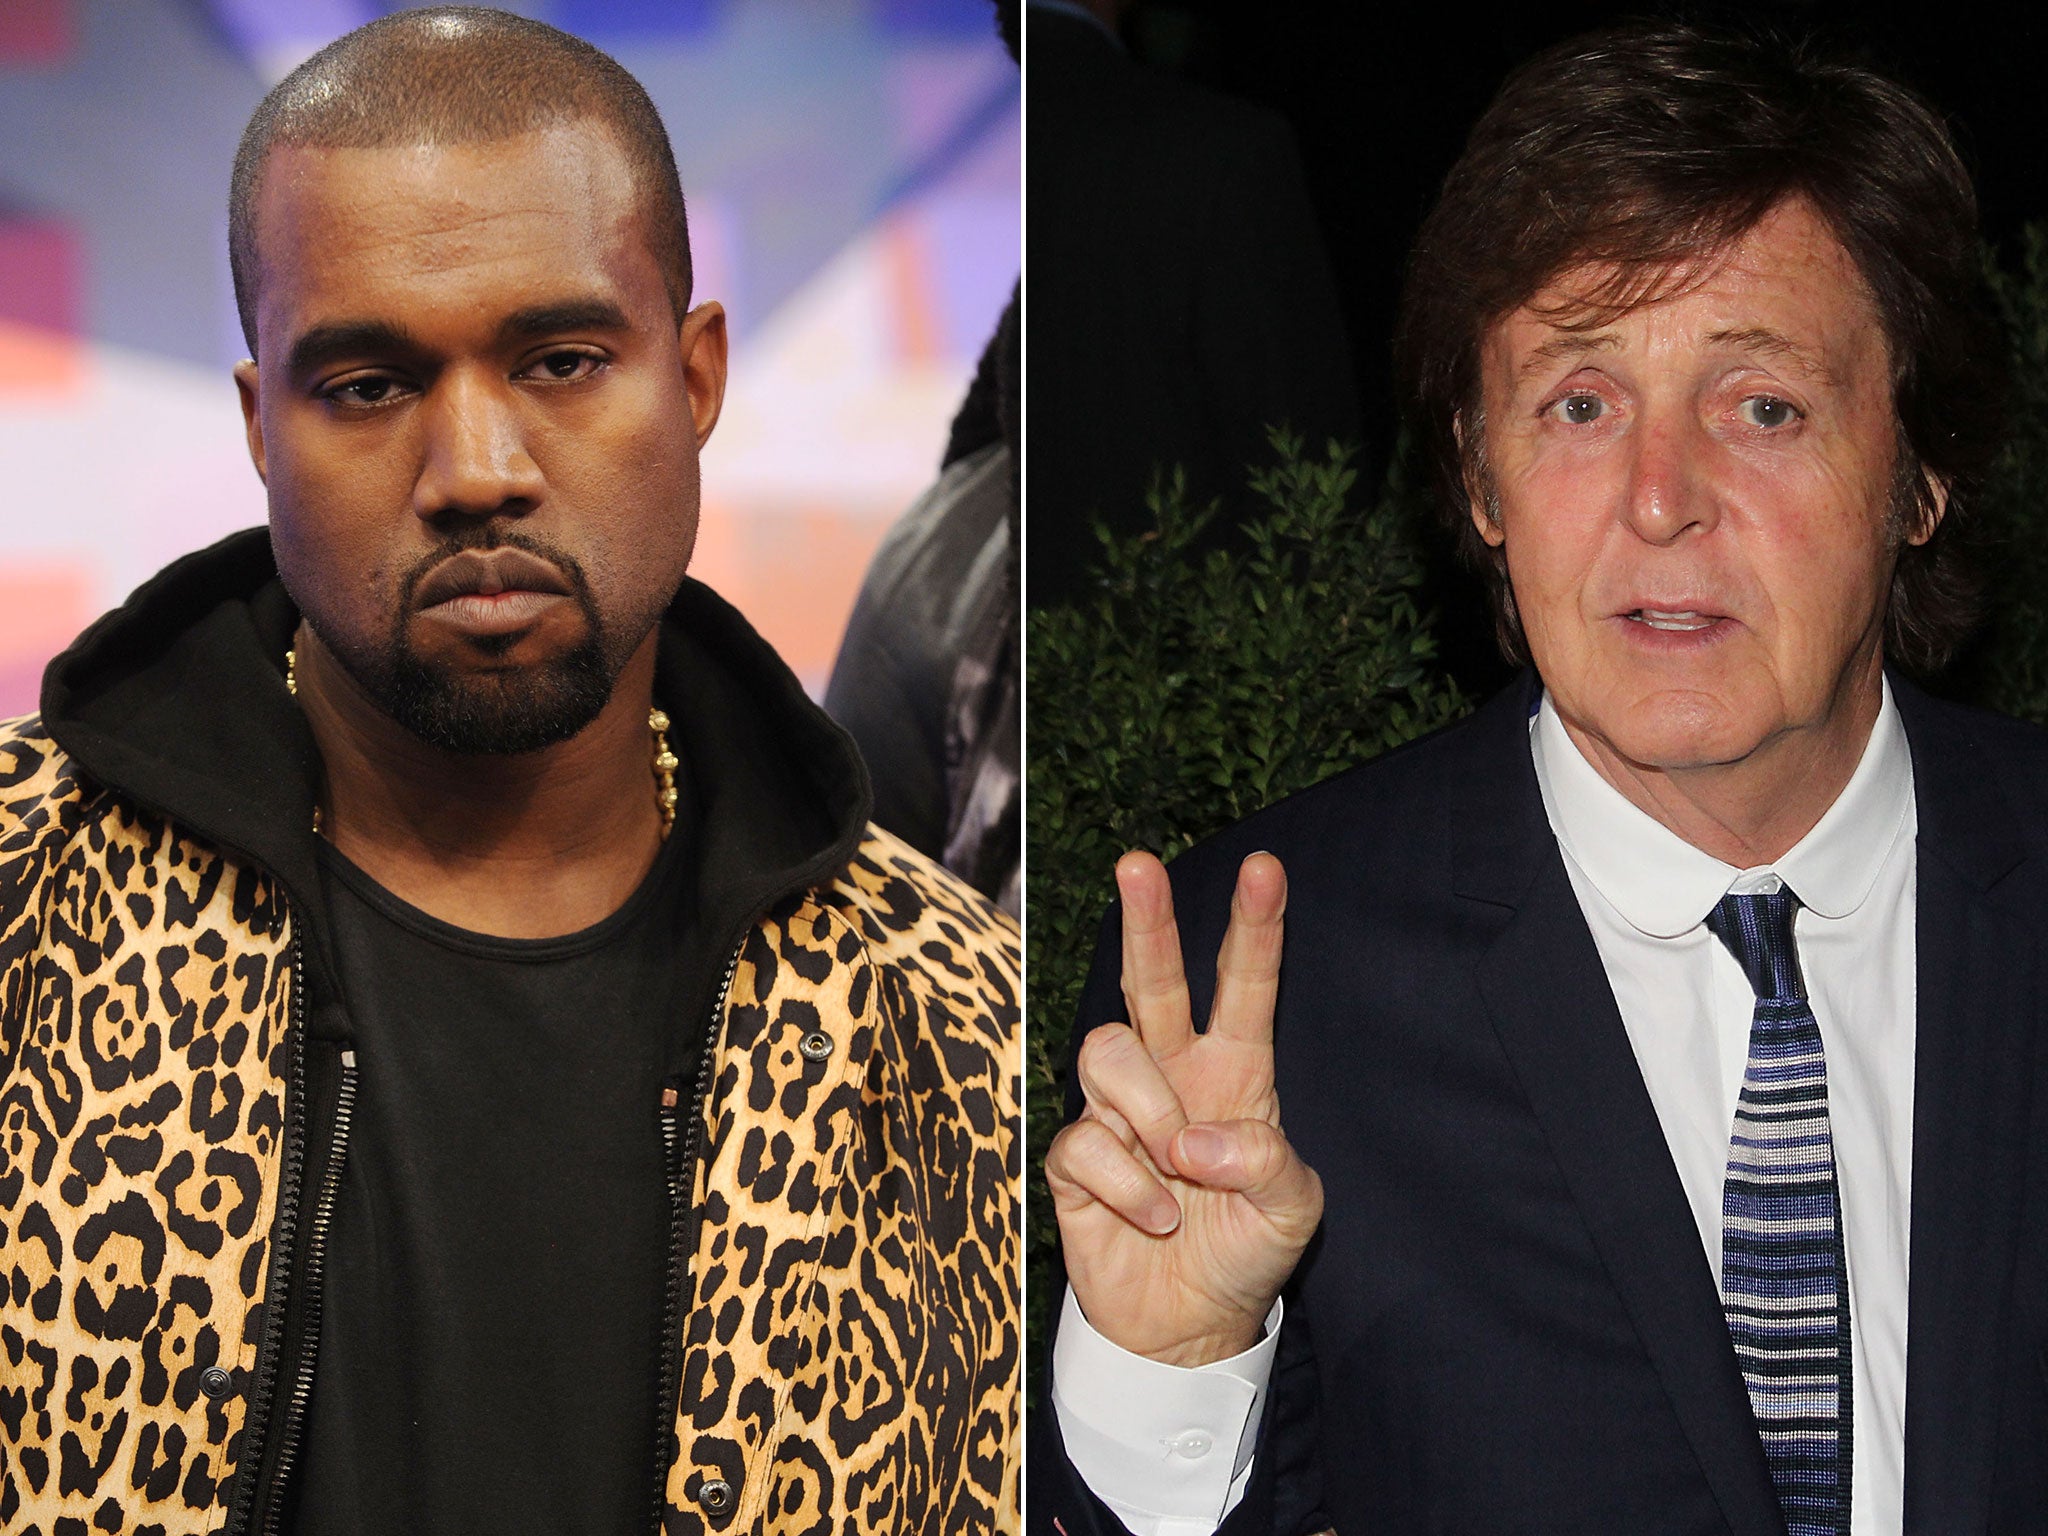 Could it be? Kanye West and Paul McCartney are reportedly teaming up for the most unlikely collaboration ever